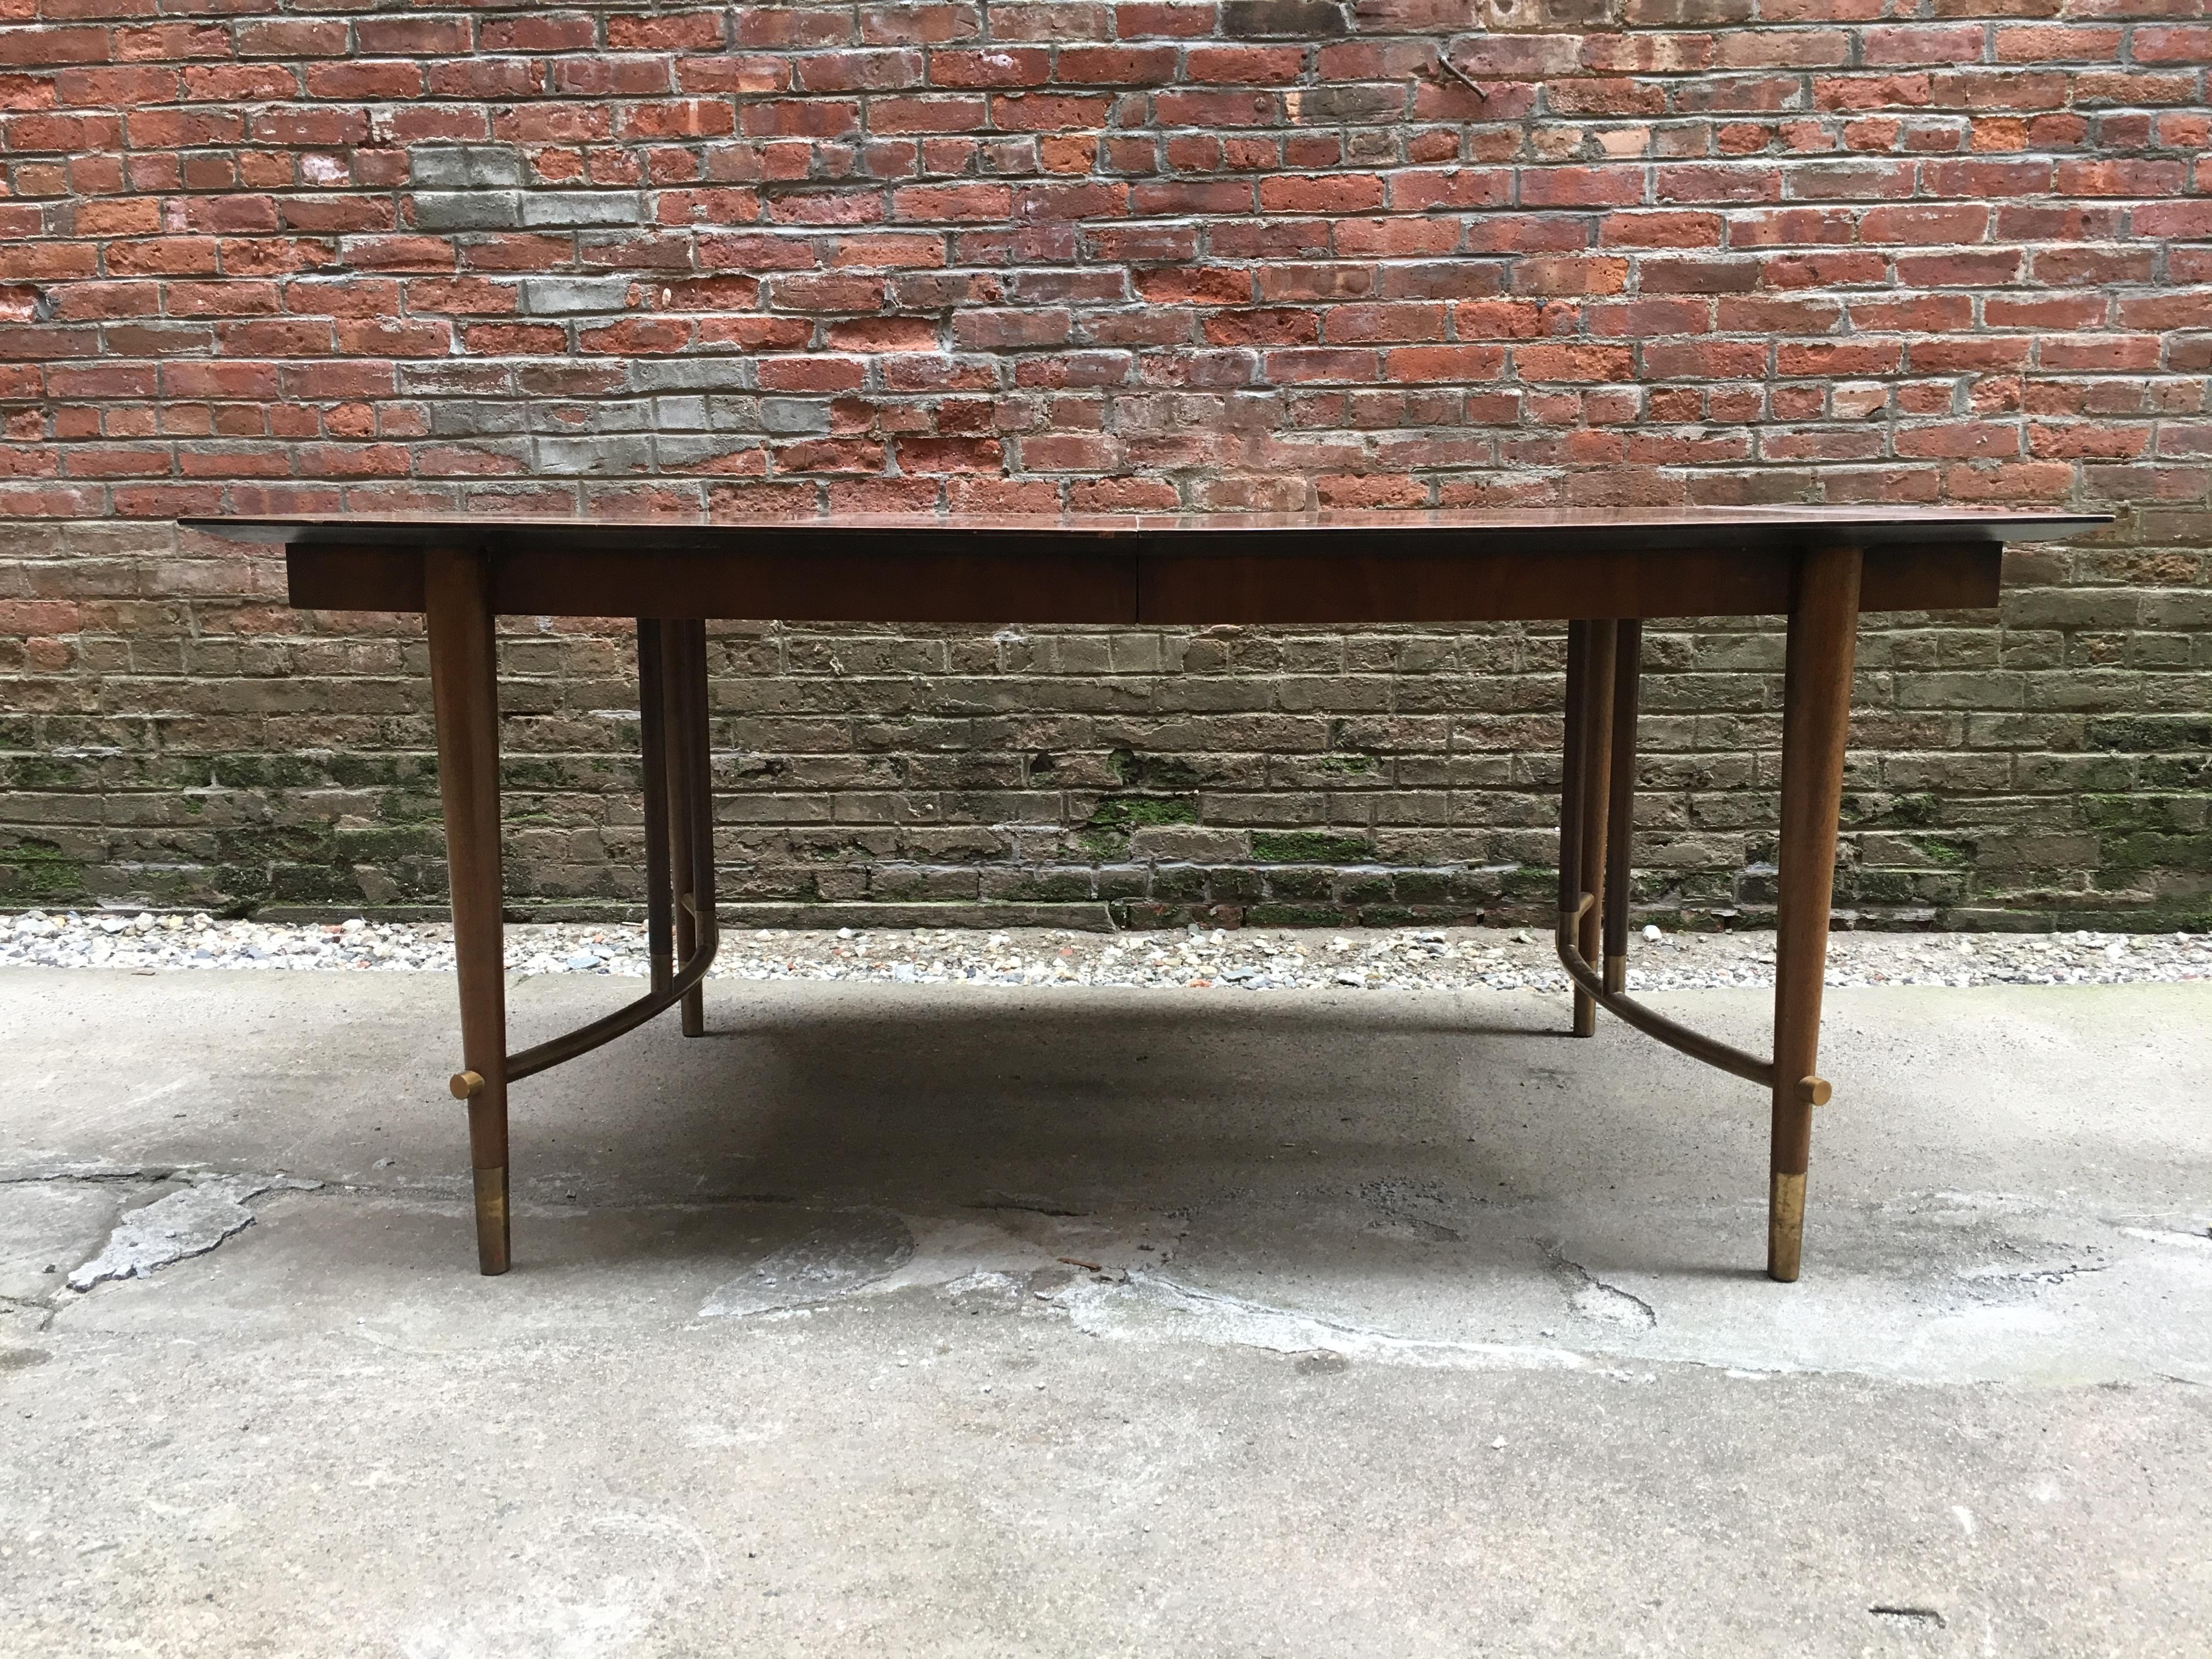 Stylish dining table designed by Bert England for Johnson Furniture Company, grand rapids, Michigan, circa 1960. Beautiful figured walnut veneers with brass base accents and sabots. Three extension leaves for more space and guests. Very good